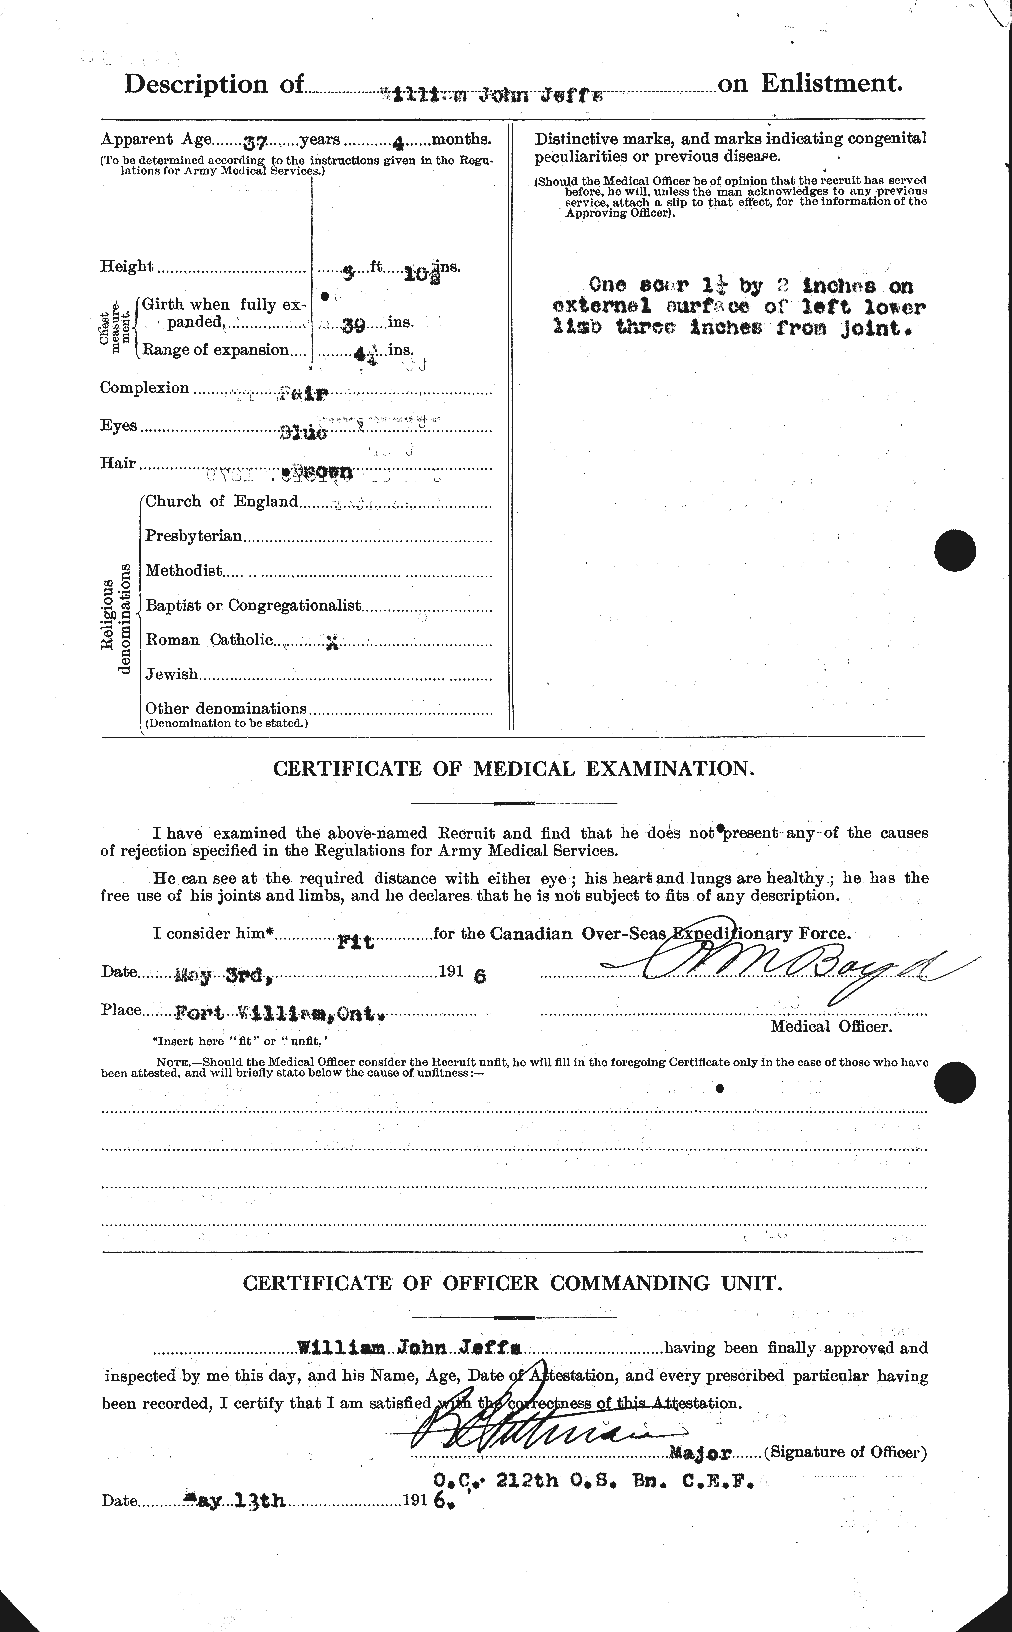 Personnel Records of the First World War - CEF 419570b